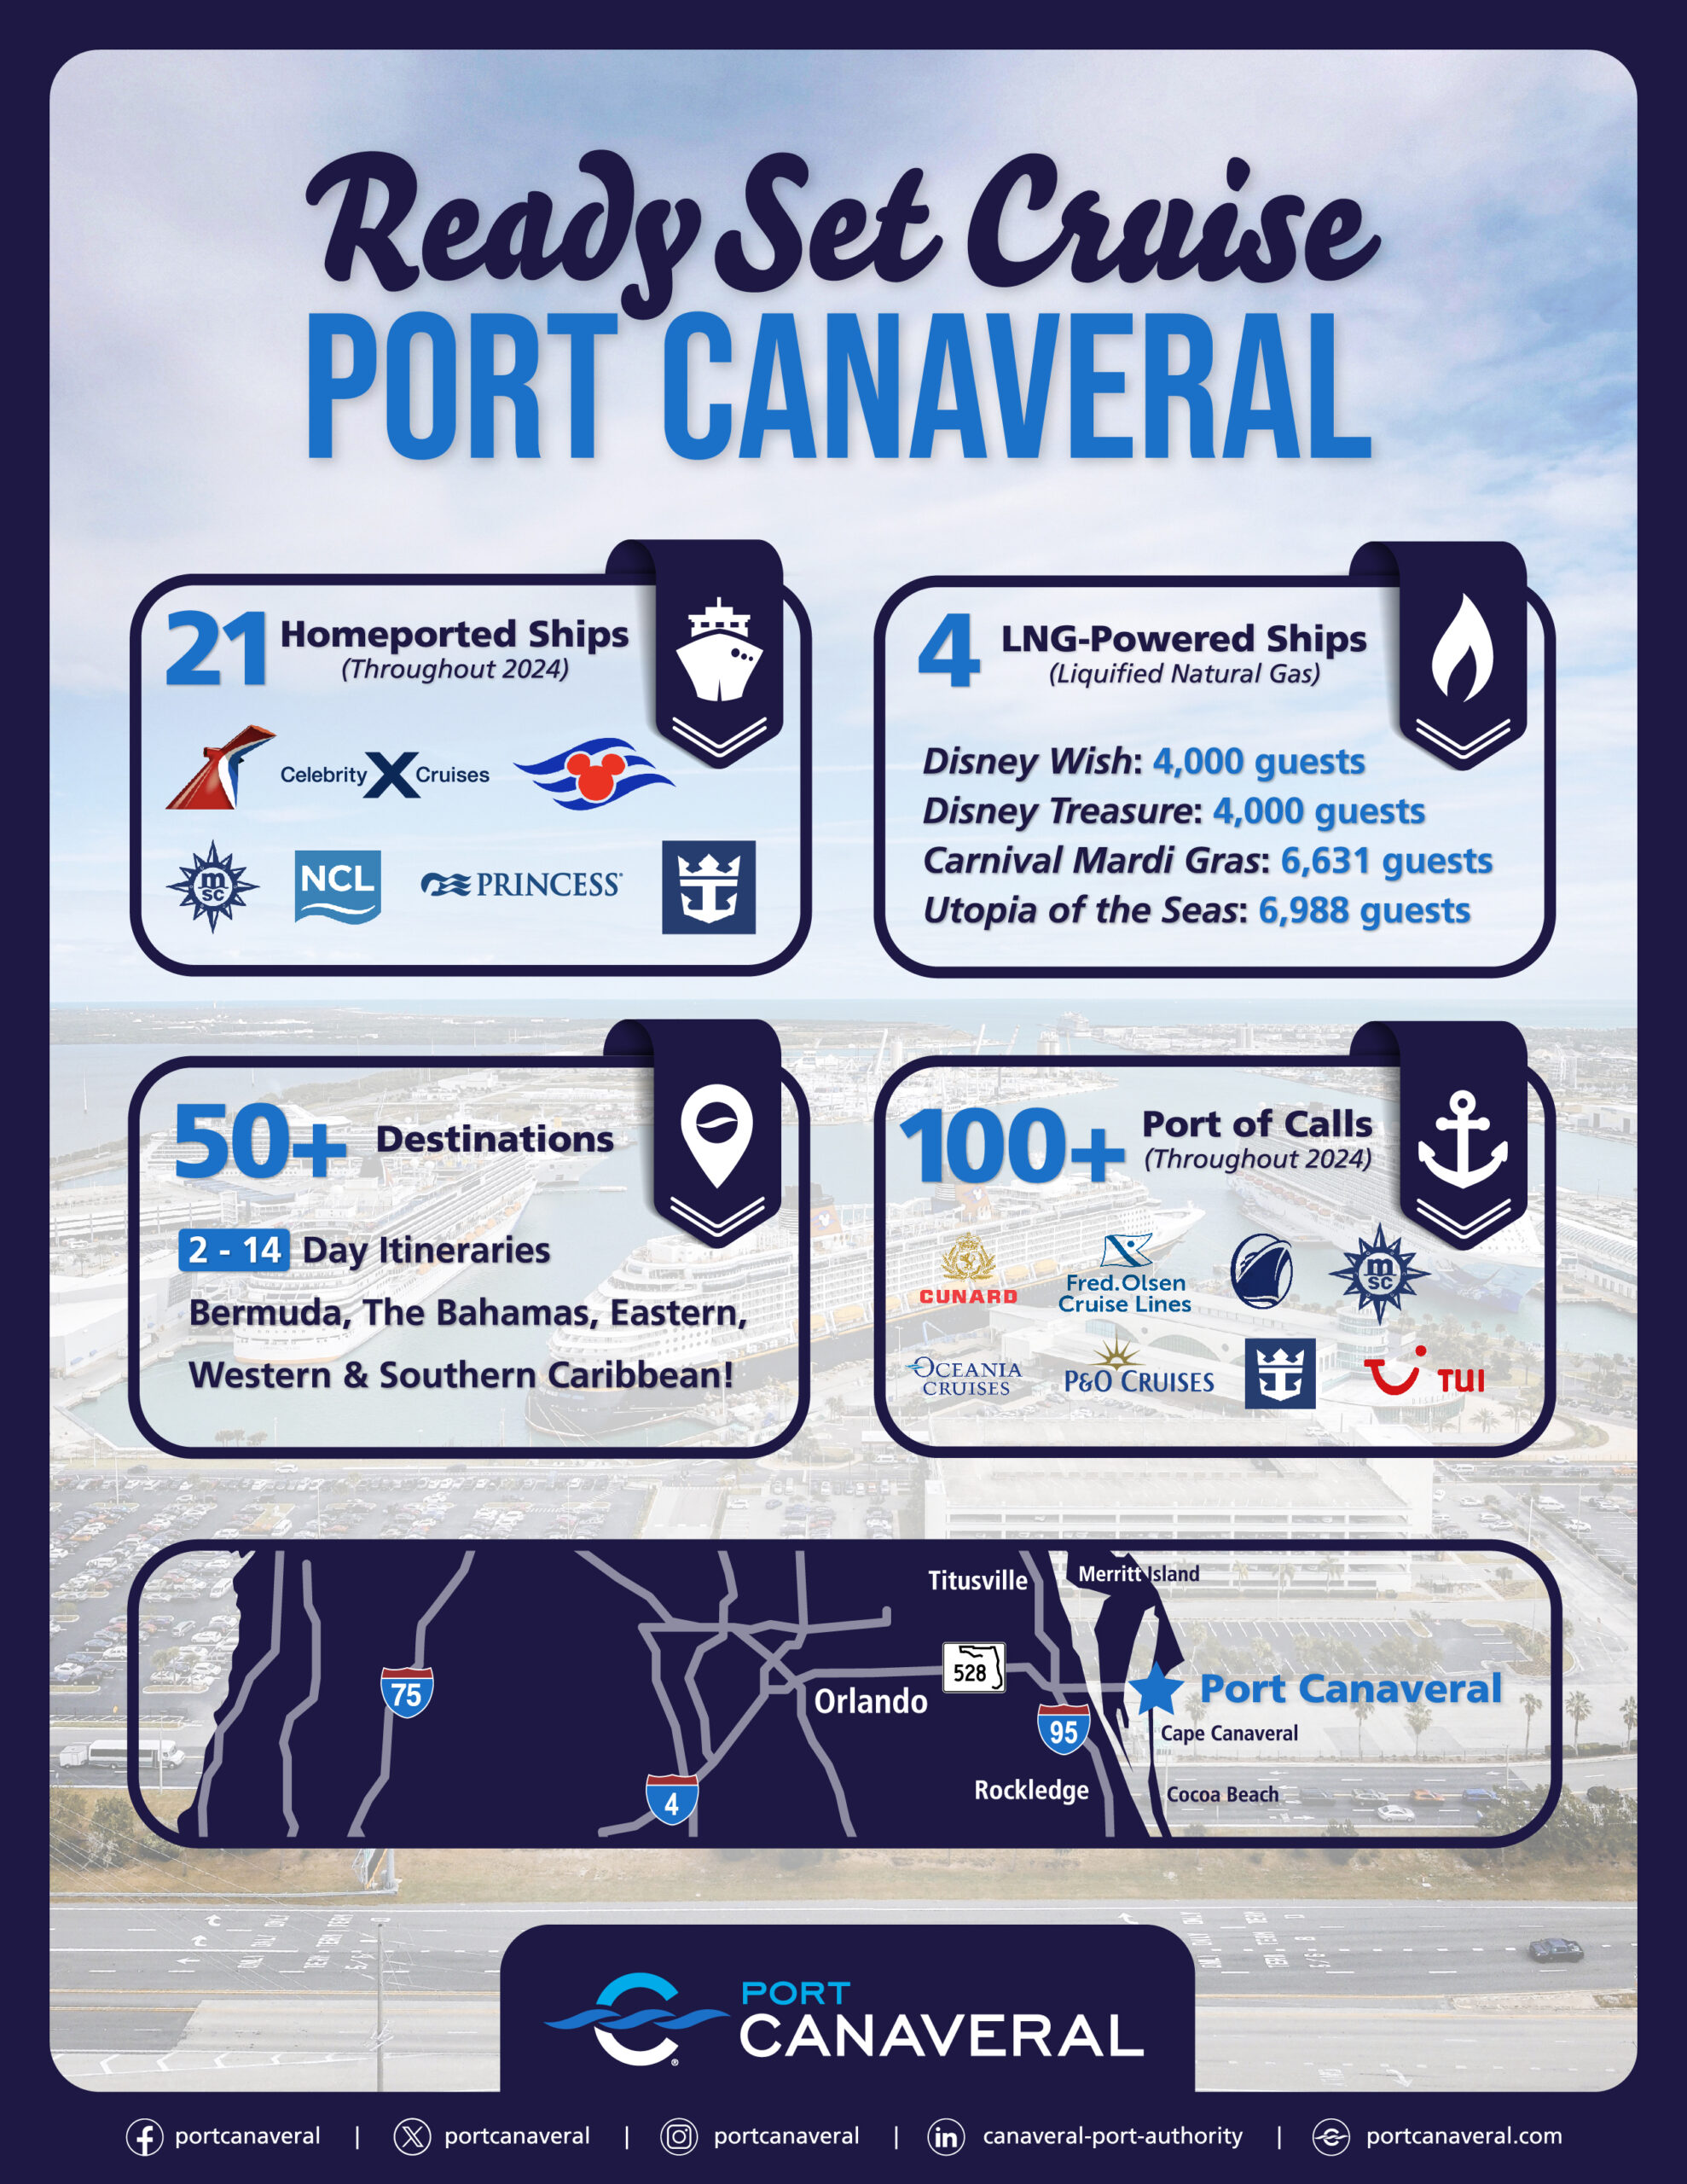 Fun Facts About Port Canaveral, a cruise terminal offering many cruise itineraries and ships that would be perfect for an Orlando Conference Group Vacation extension!